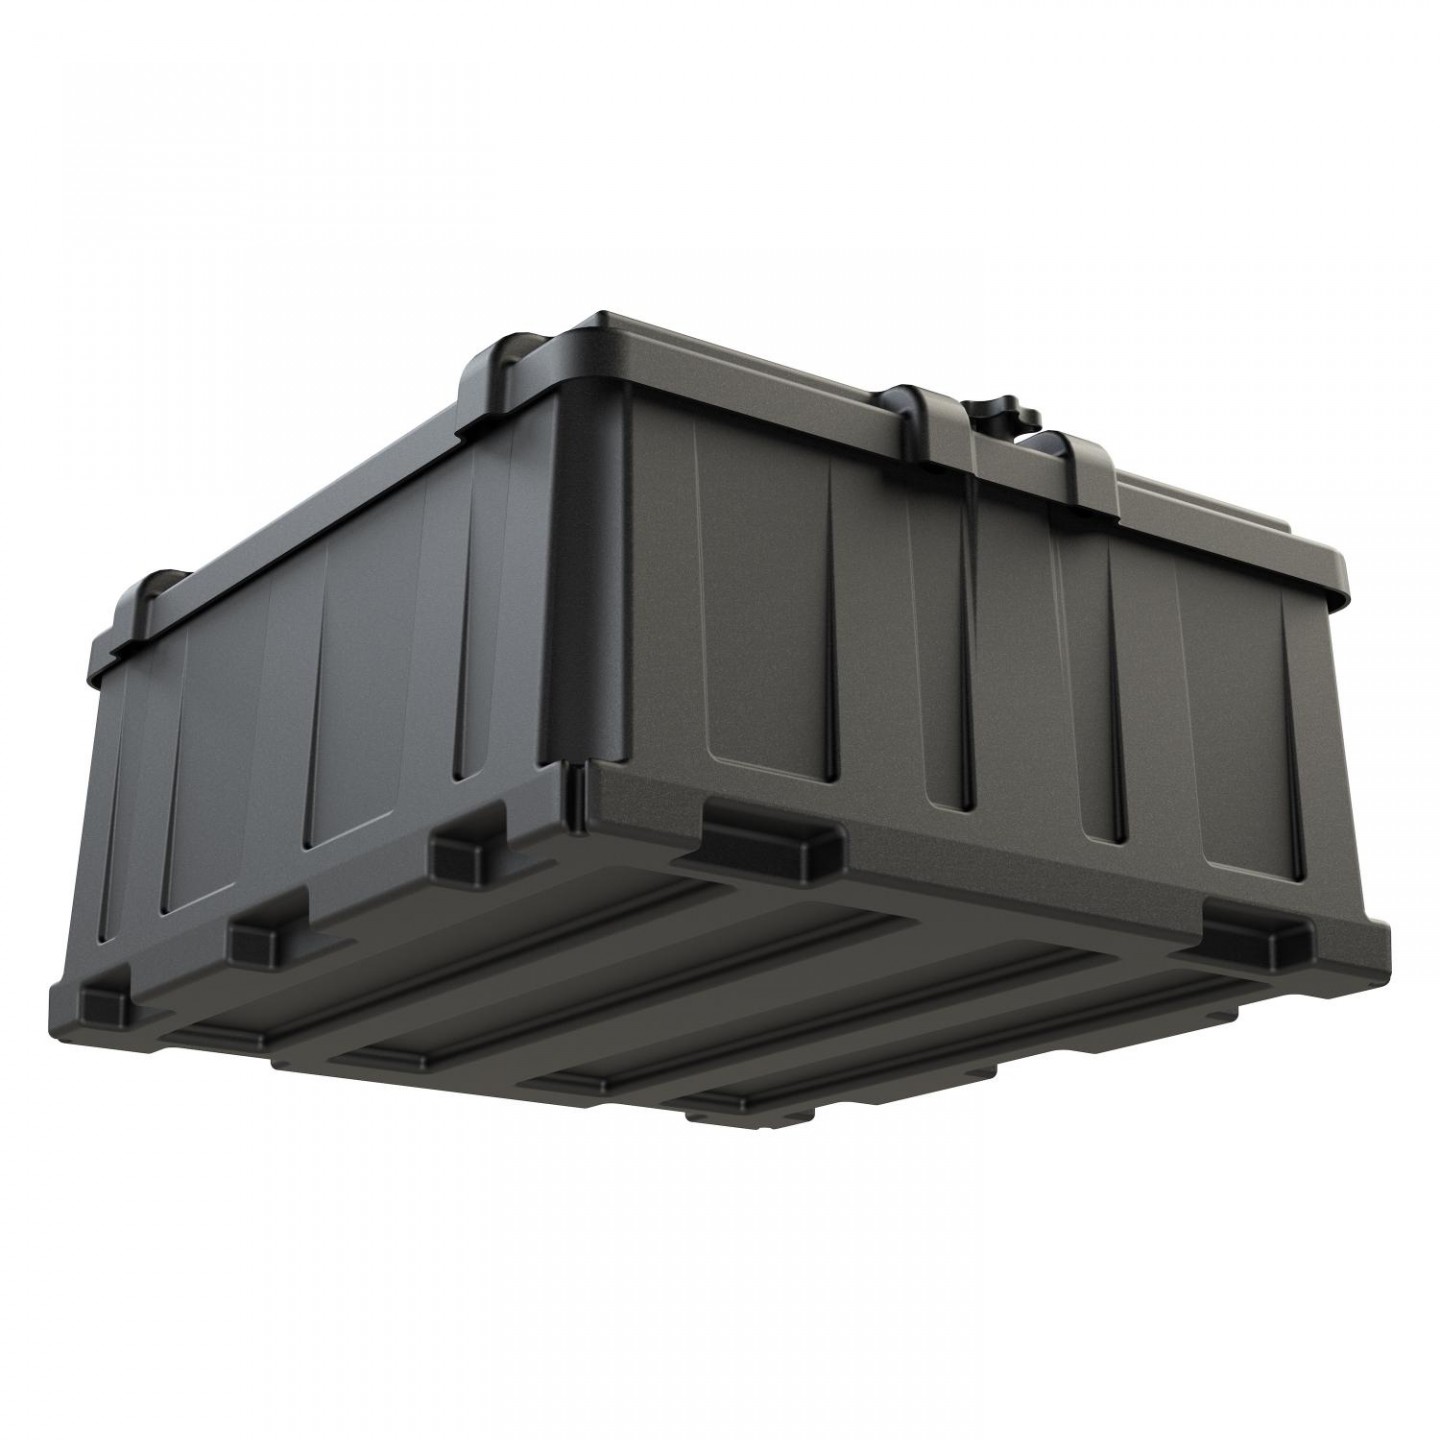 Heavy Duty Battery Box Holder for Marine, RV, Camper and Trailer